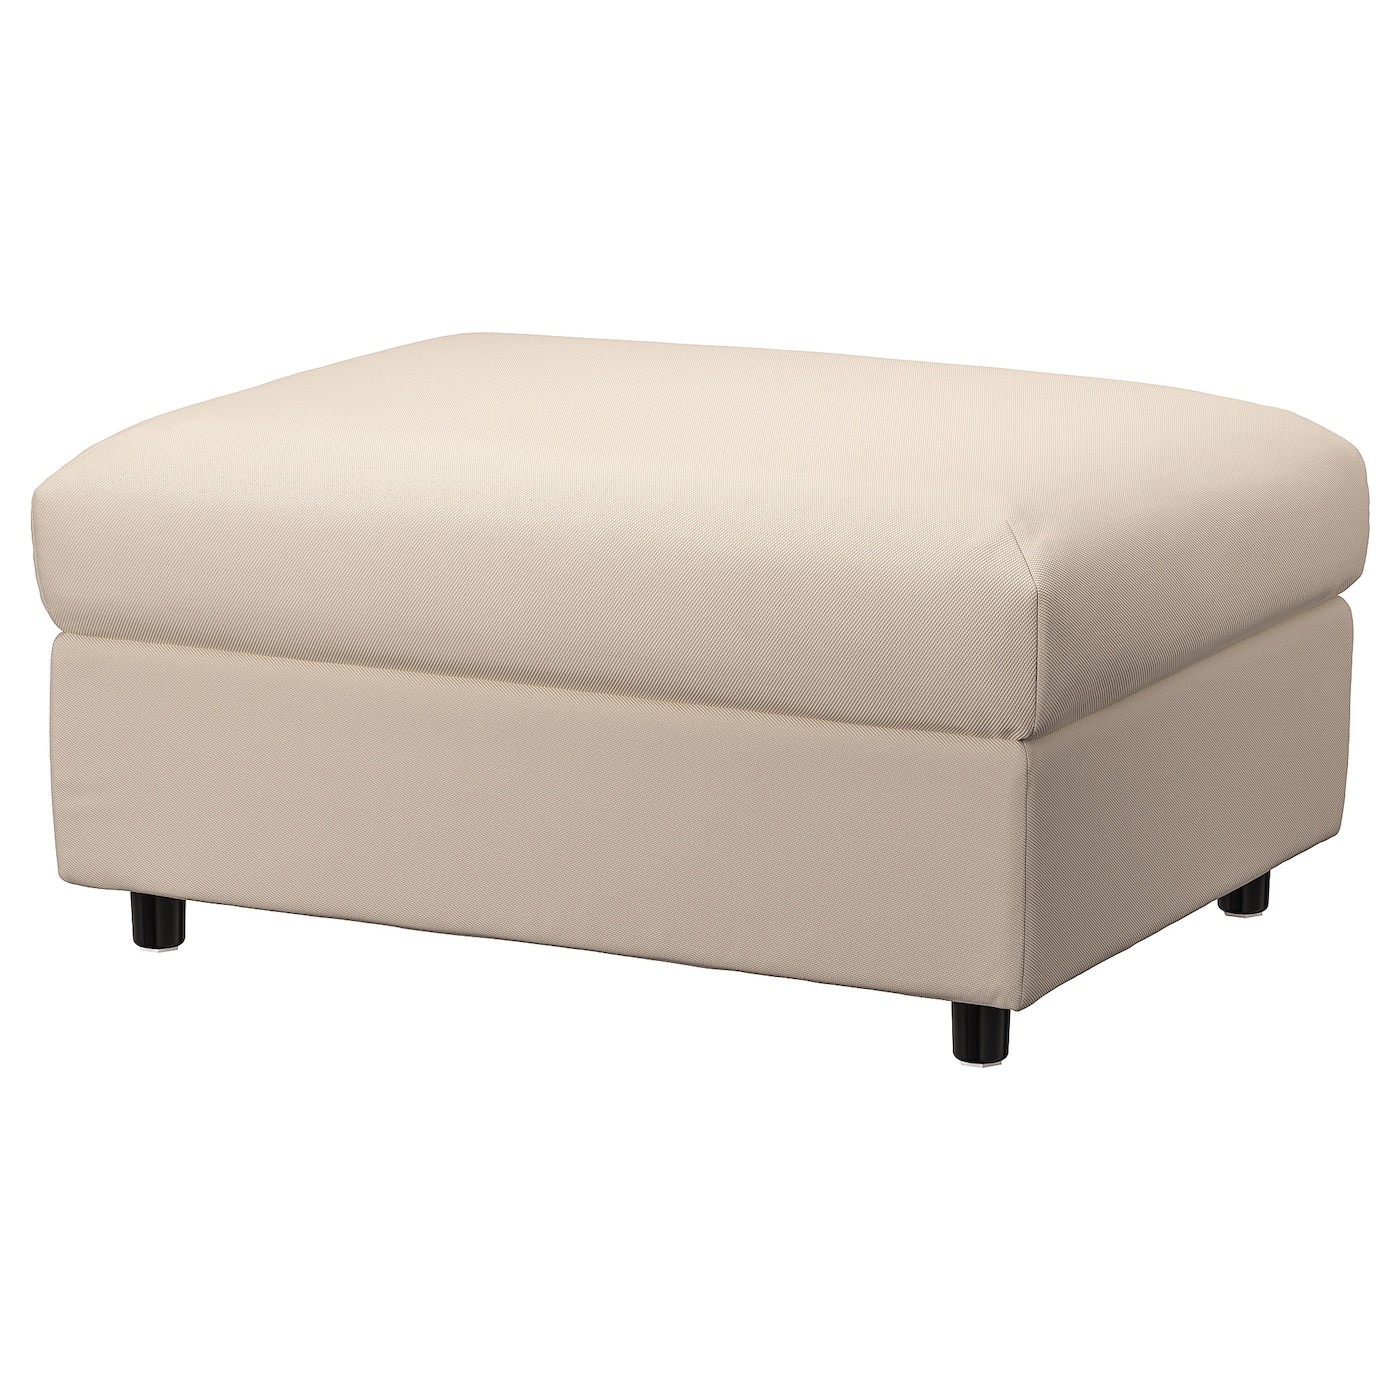 VIMLE Cover for footstool with storage